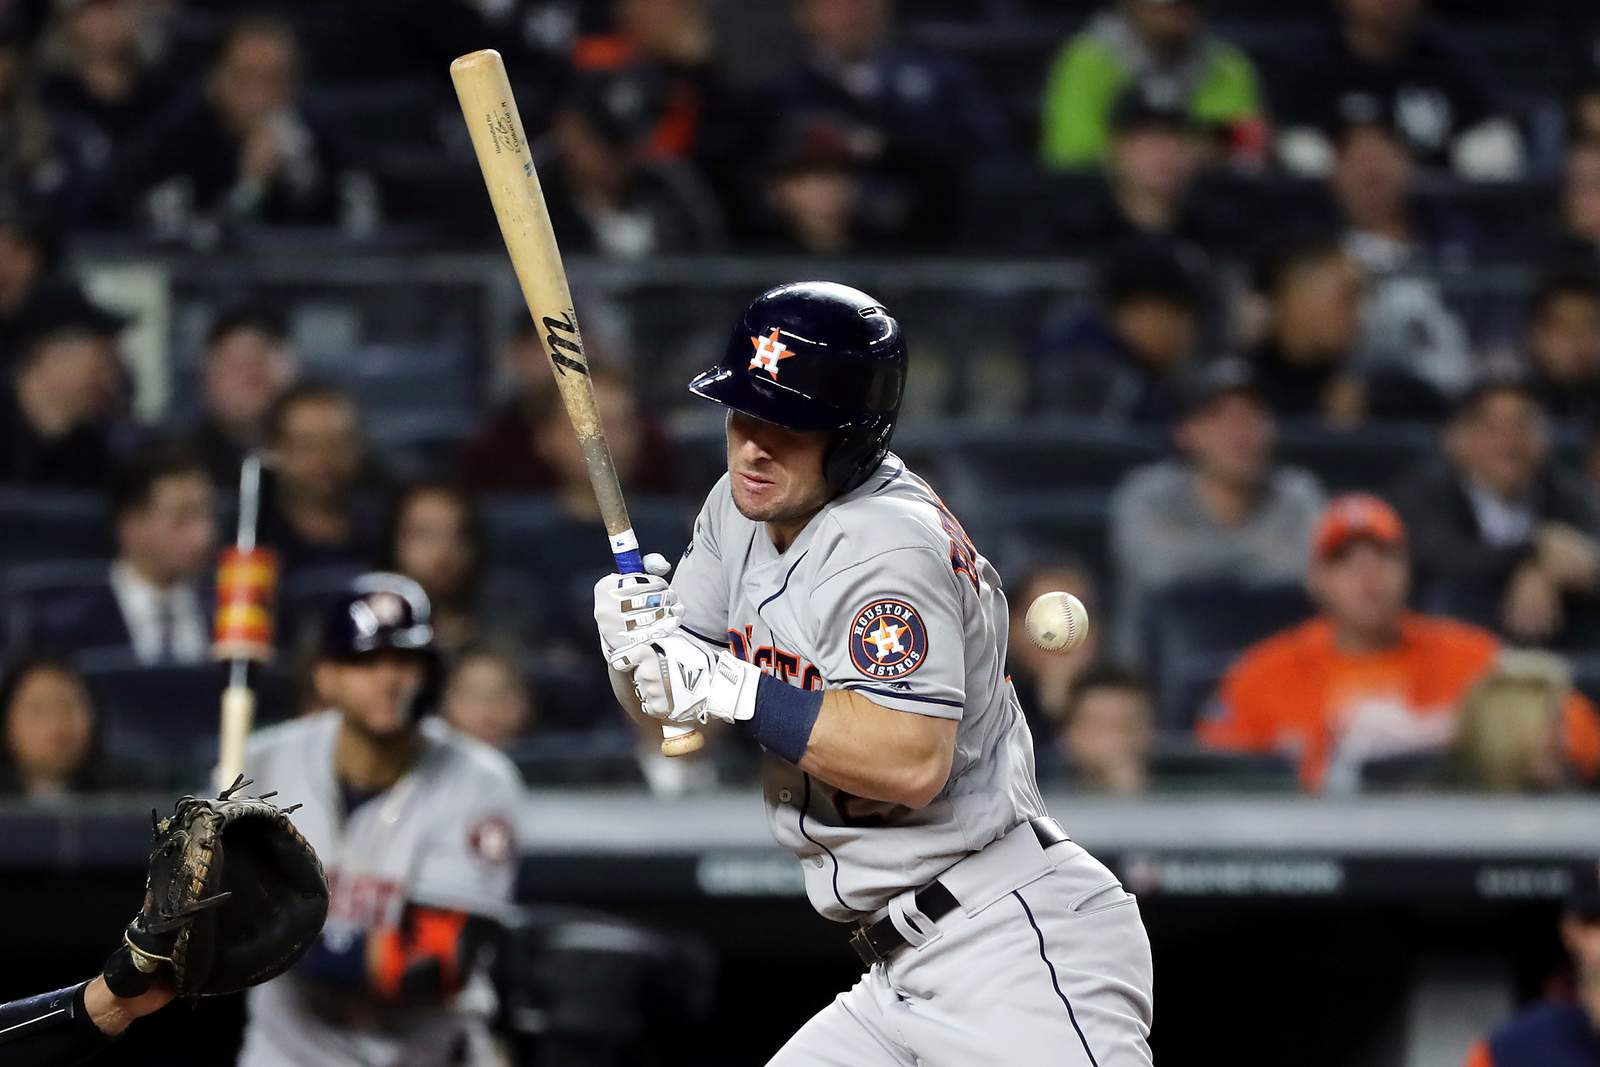 Ouch! Offshore sports book publishes odds on how many times Astros players will be hit by pitches in 2020